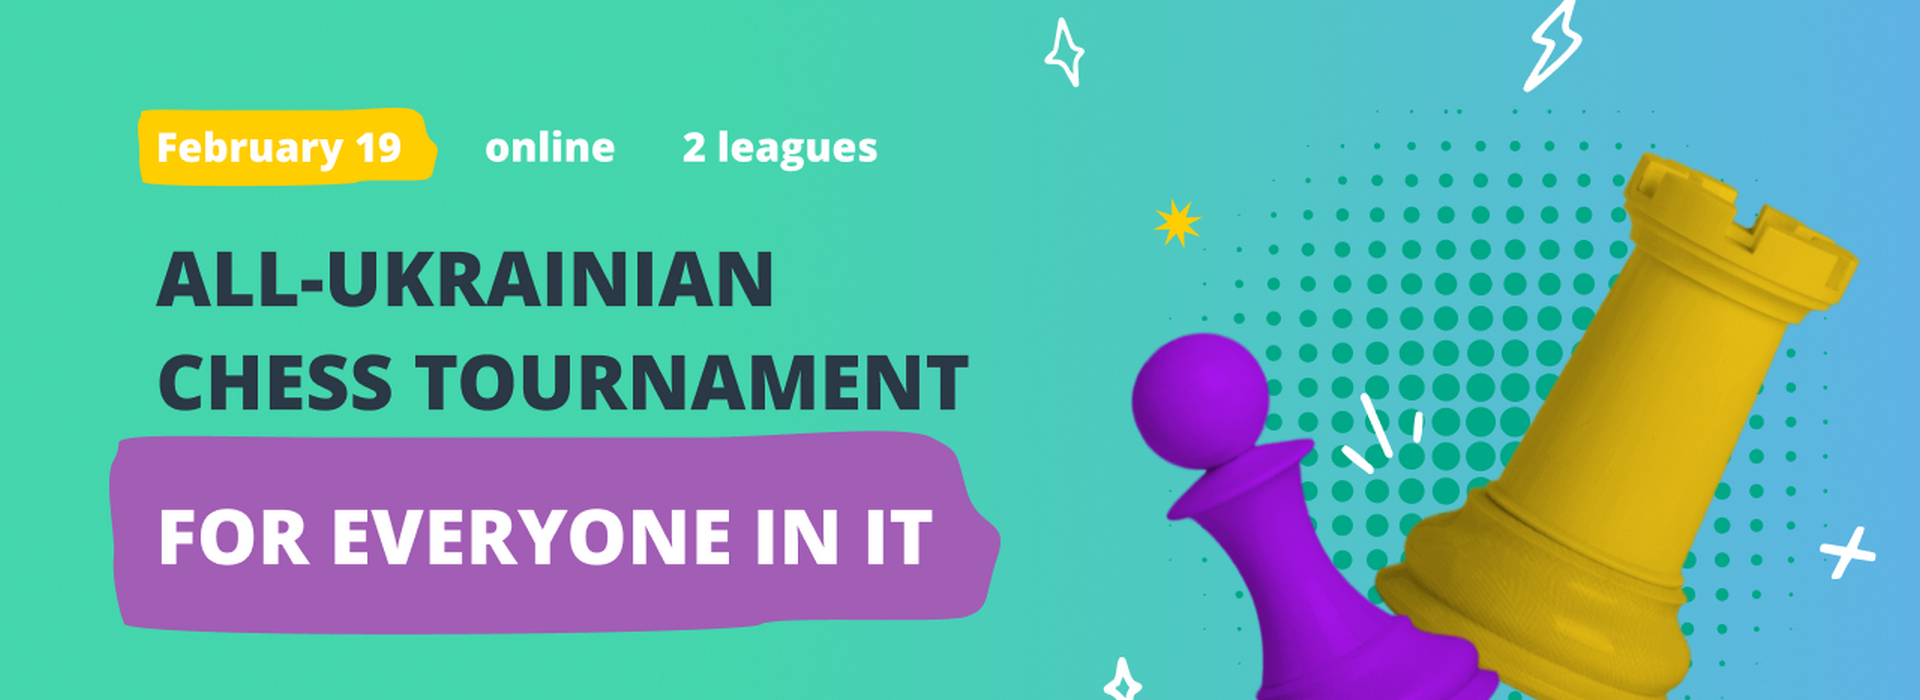 Intellias to Hold a Chess Tournament Among All Representatives of the Ukrainian IT Industry